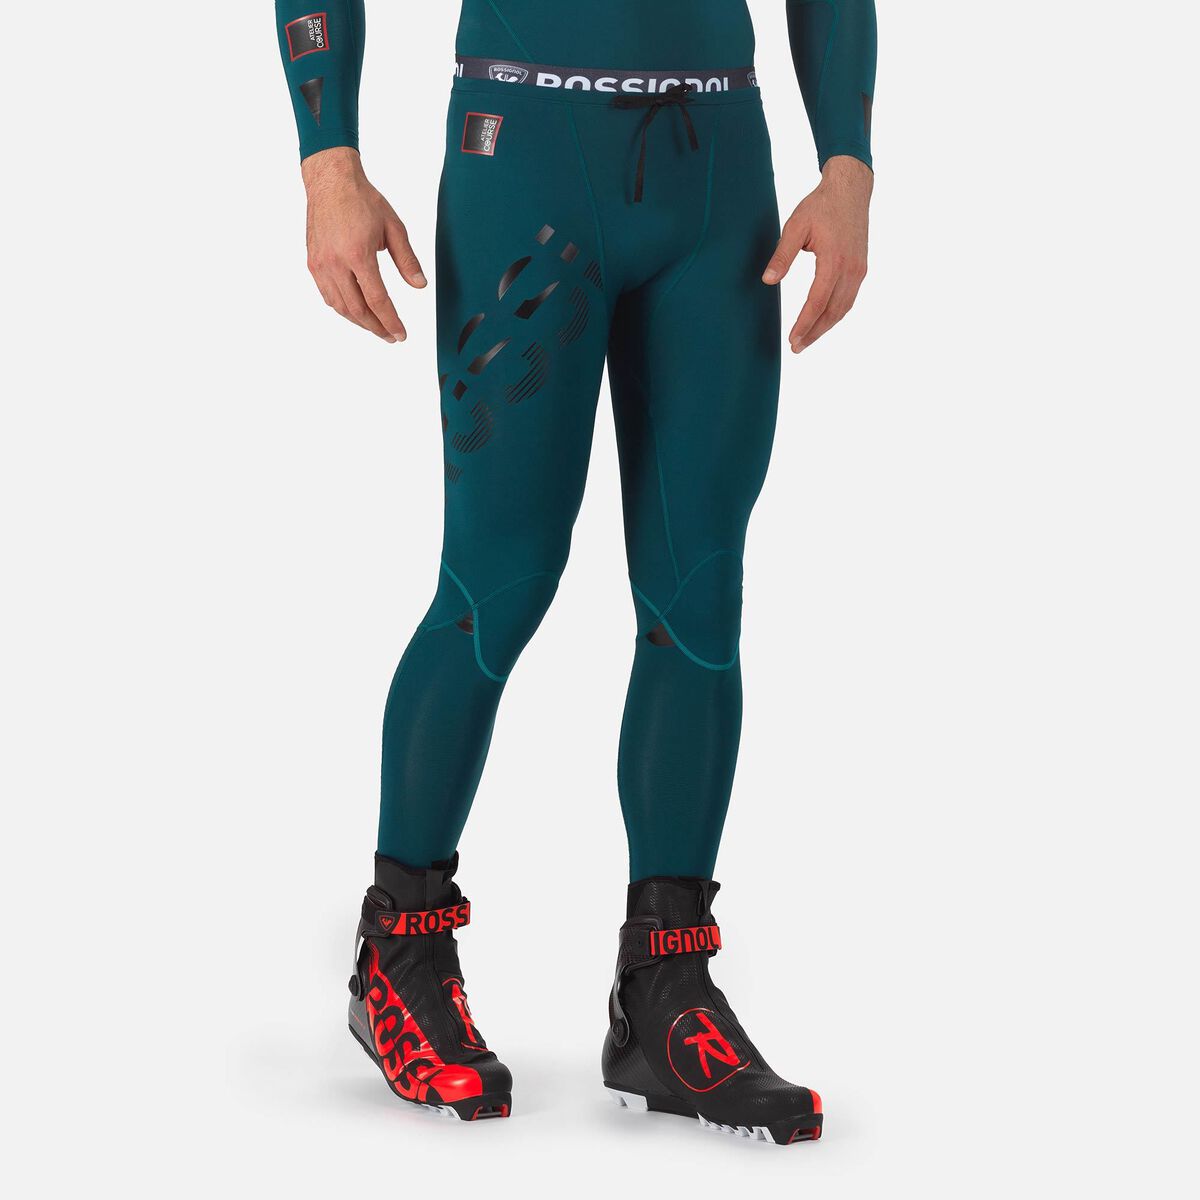 Men's Infini Compression Race Tights, OUTLET